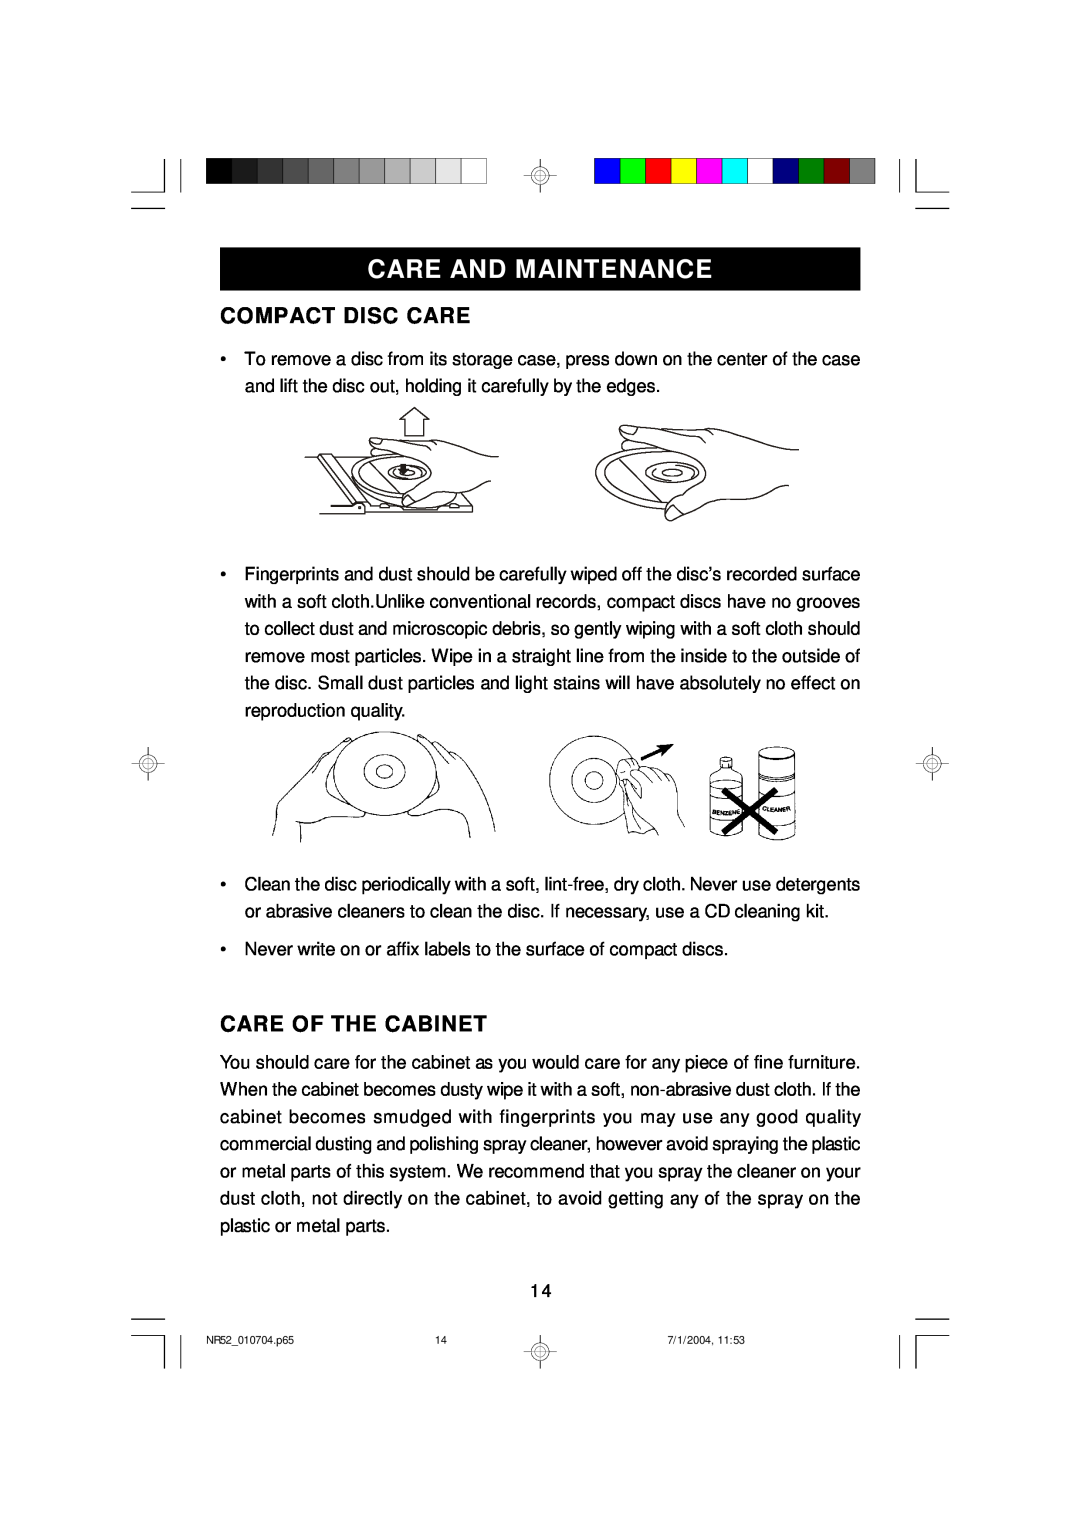 Emerson NR52 owner manual Care And Maintenance, Compact Disc Care, Care Of The Cabinet 